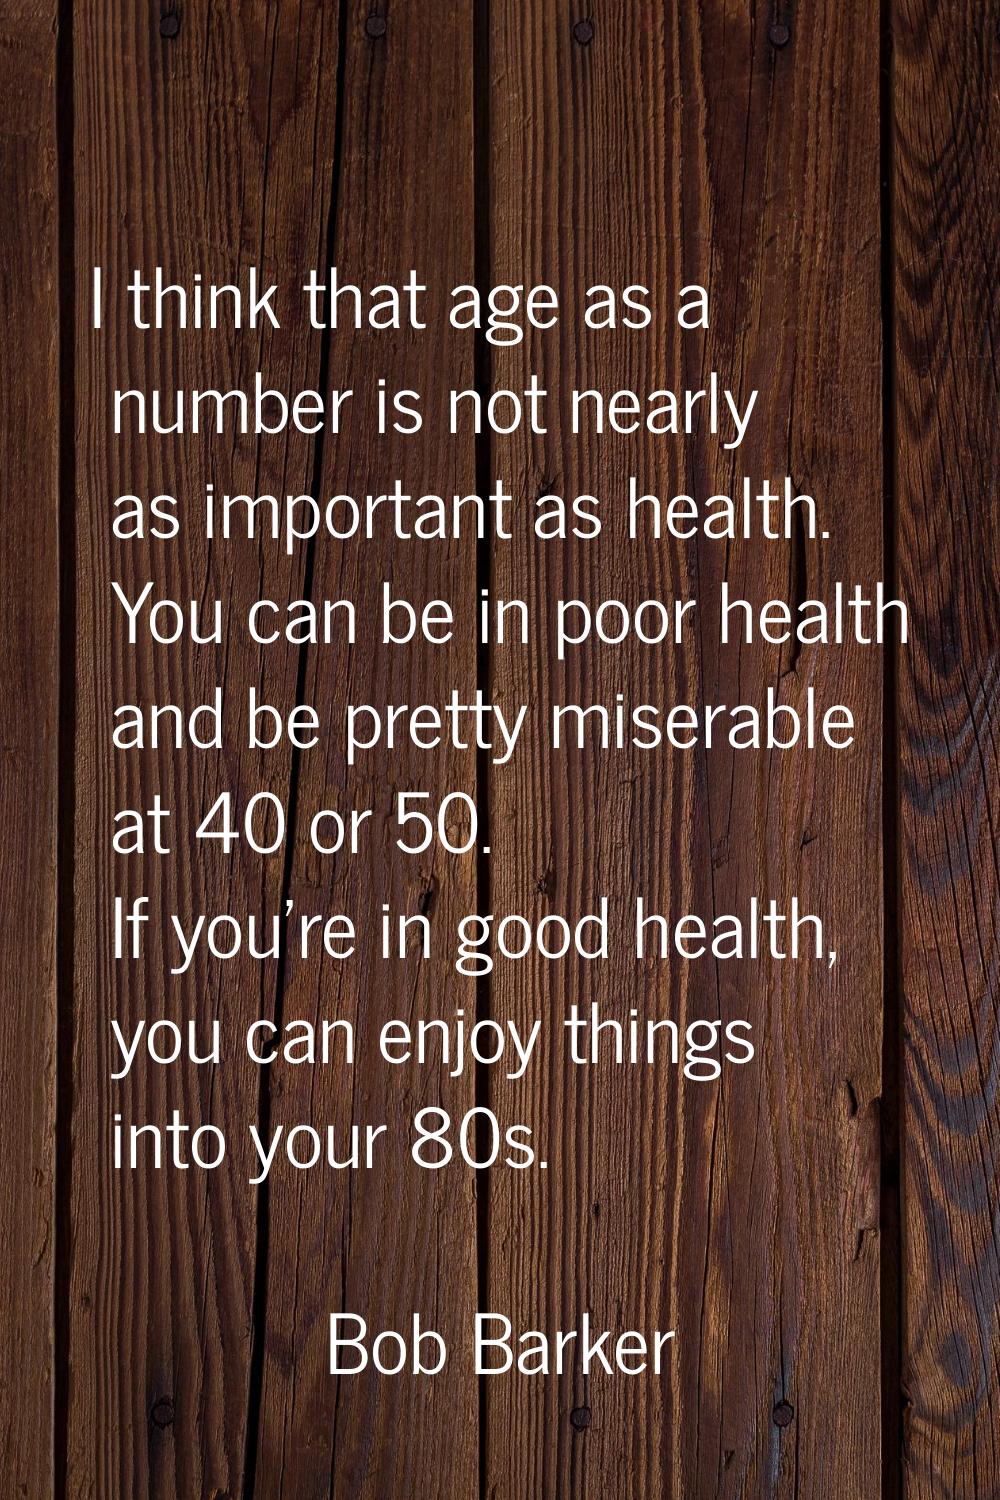 I think that age as a number is not nearly as important as health. You can be in poor health and be